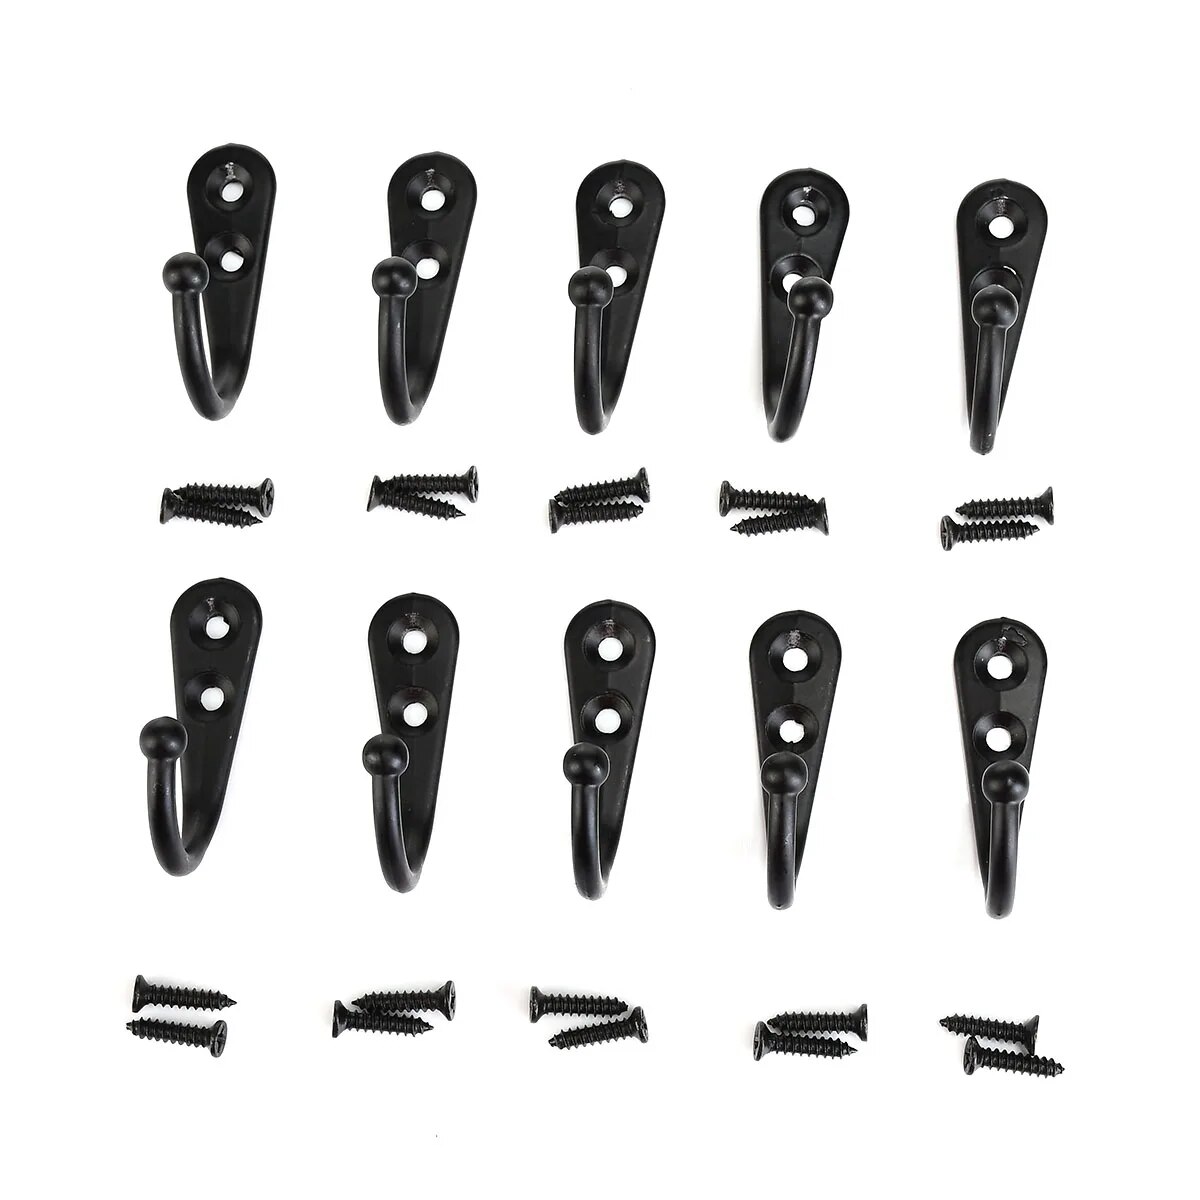 10pcs Small Antique Hooks Wall Hanger Curved Buckle Horn Lock Clasp Hook Robe Coats Hat Clothes Towel With Screws Holder Storage